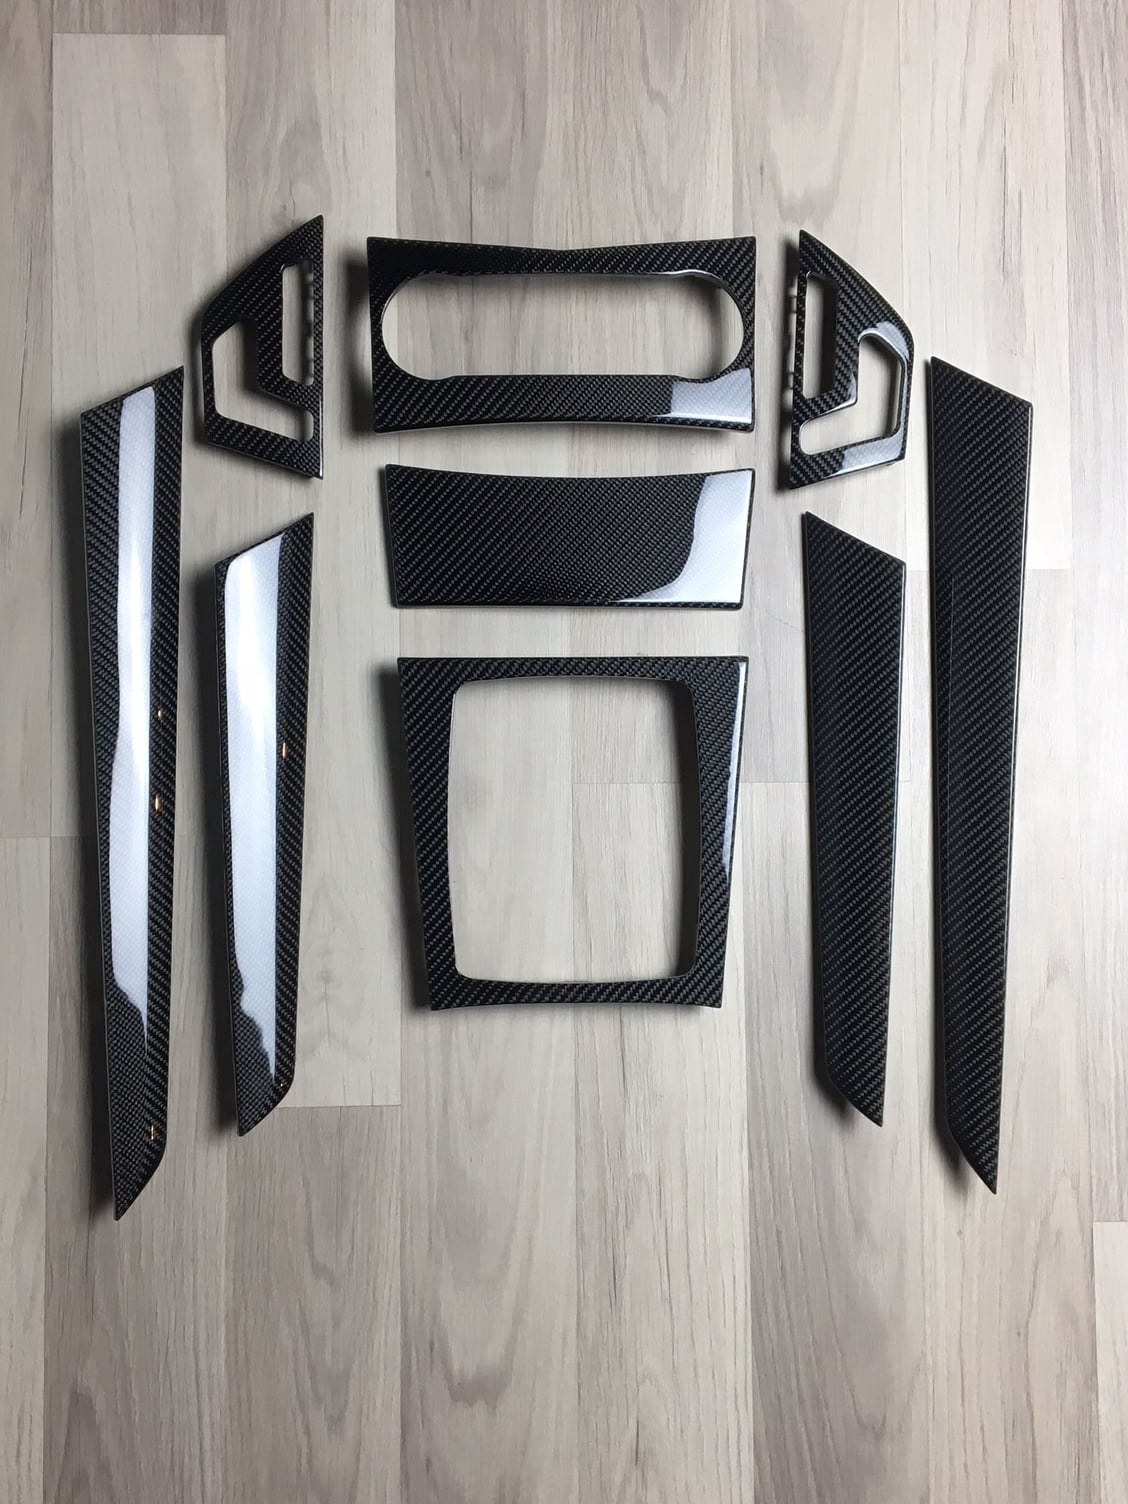 Interior/Upholstery - FS: New Carbon Interior Trims for 08-11 C63 AMG / C-class Sedan and Estate - New - 2008 to 2011 Mercedes-Benz C63 AMG - Kolobrzeg, Poland